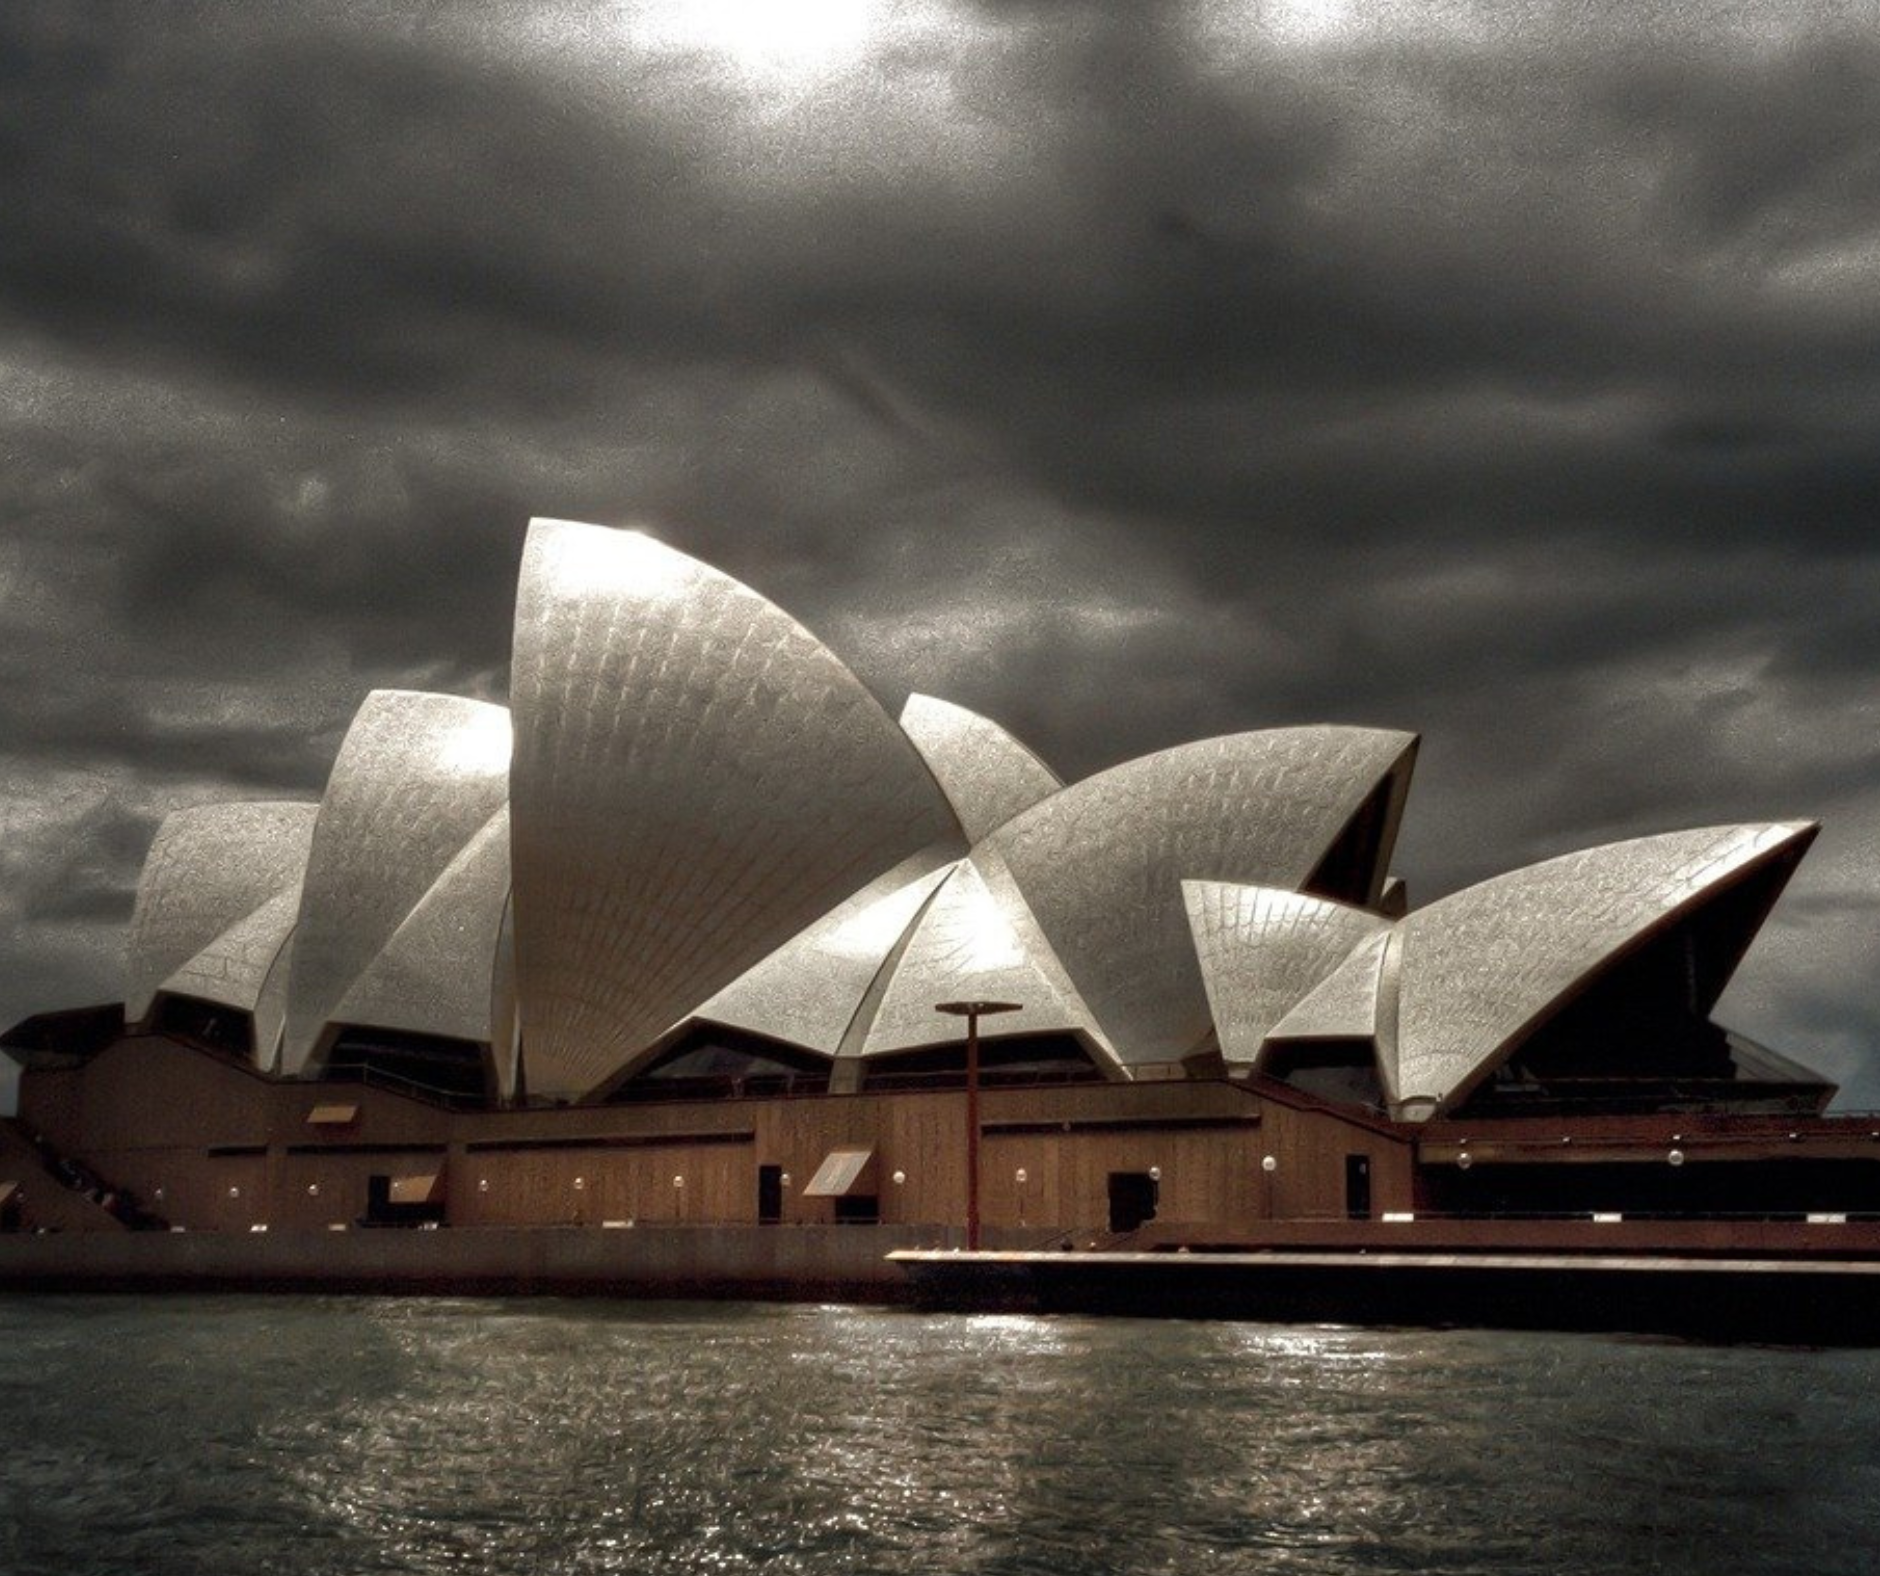 On our wettest days, stormclouds can dump 30 trillion litres of water across Australia